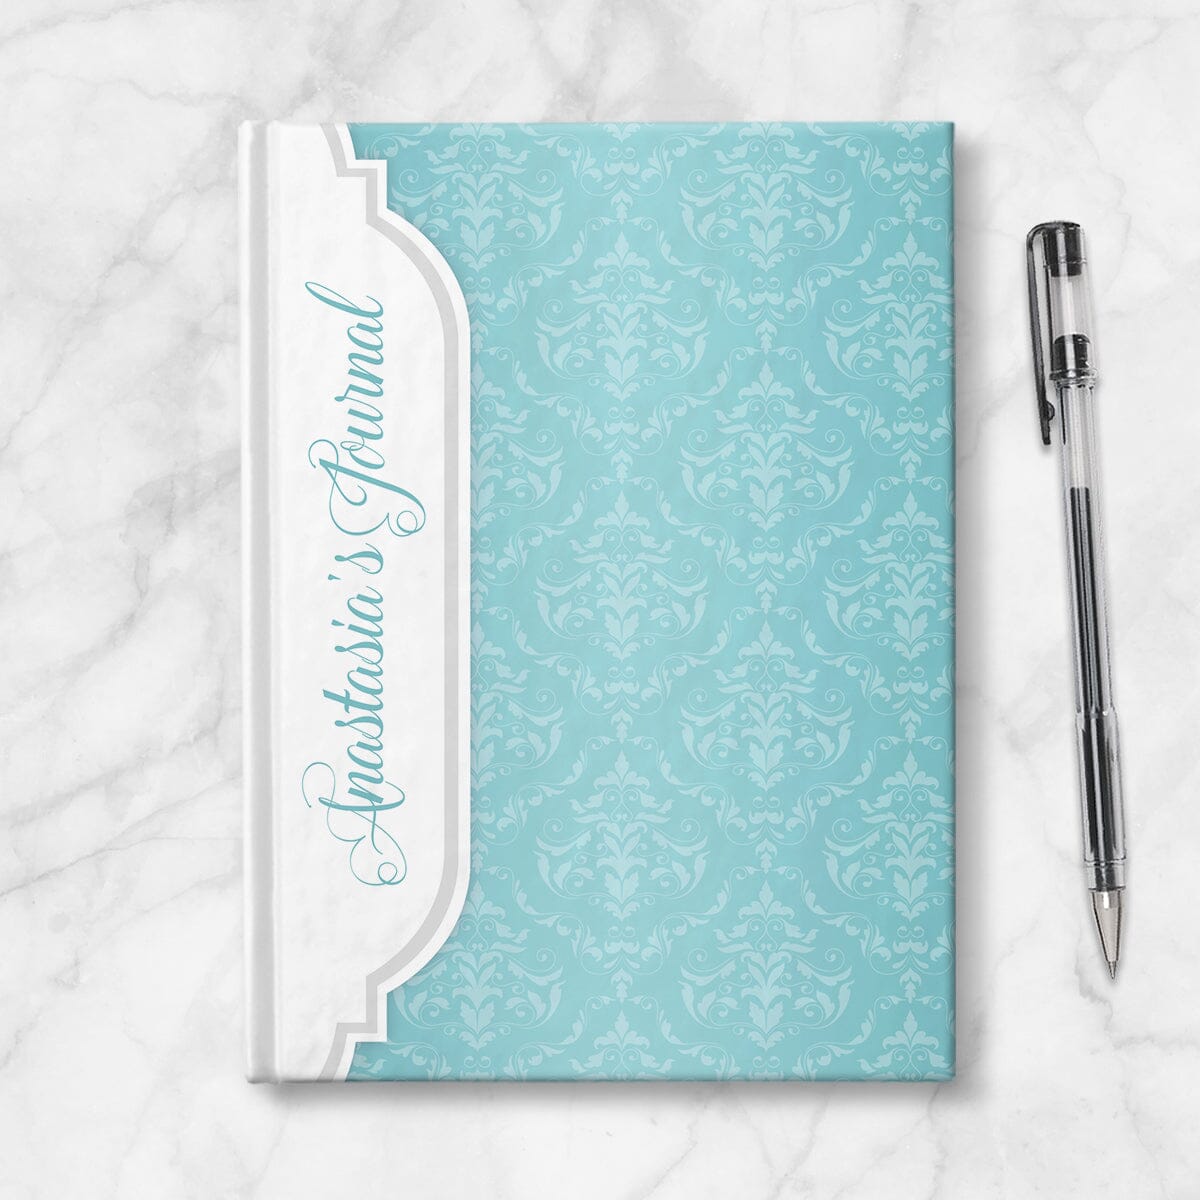 Personalized Turquoise Damask Journal at Artistically Invited. Image shows the book on a countertop next to a pen.